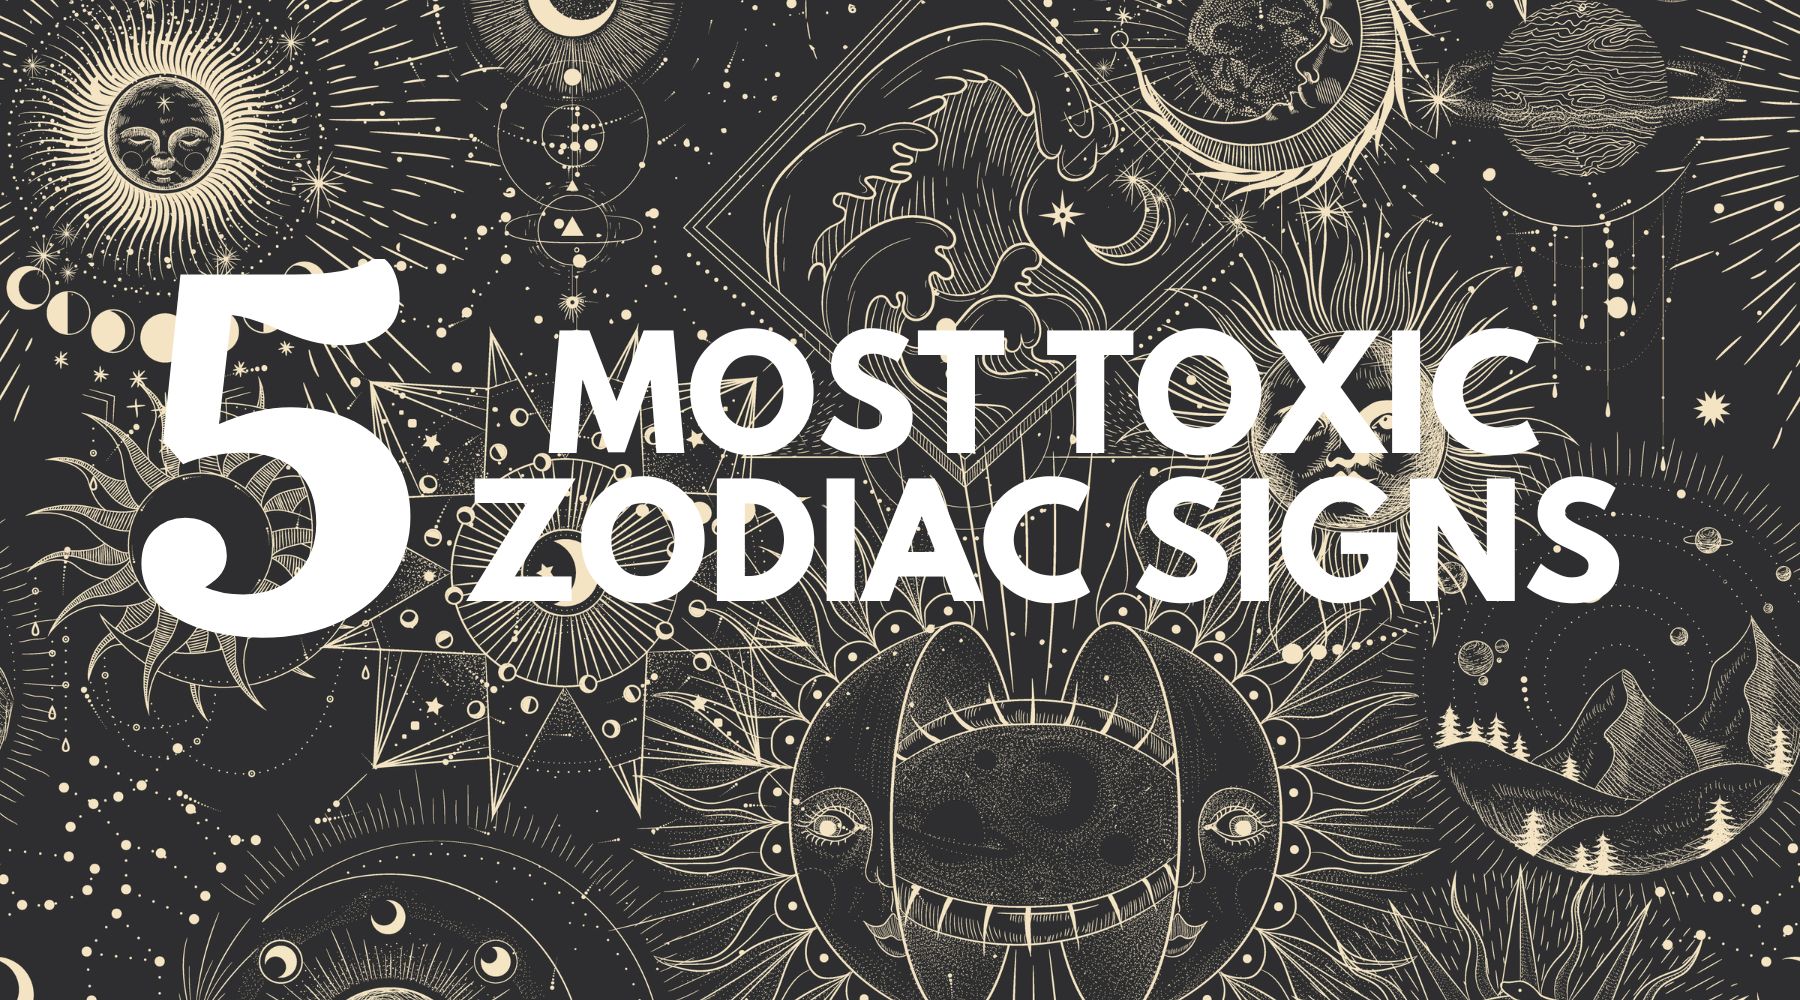 These are the 3 most powerful and charismatic zodiac signs